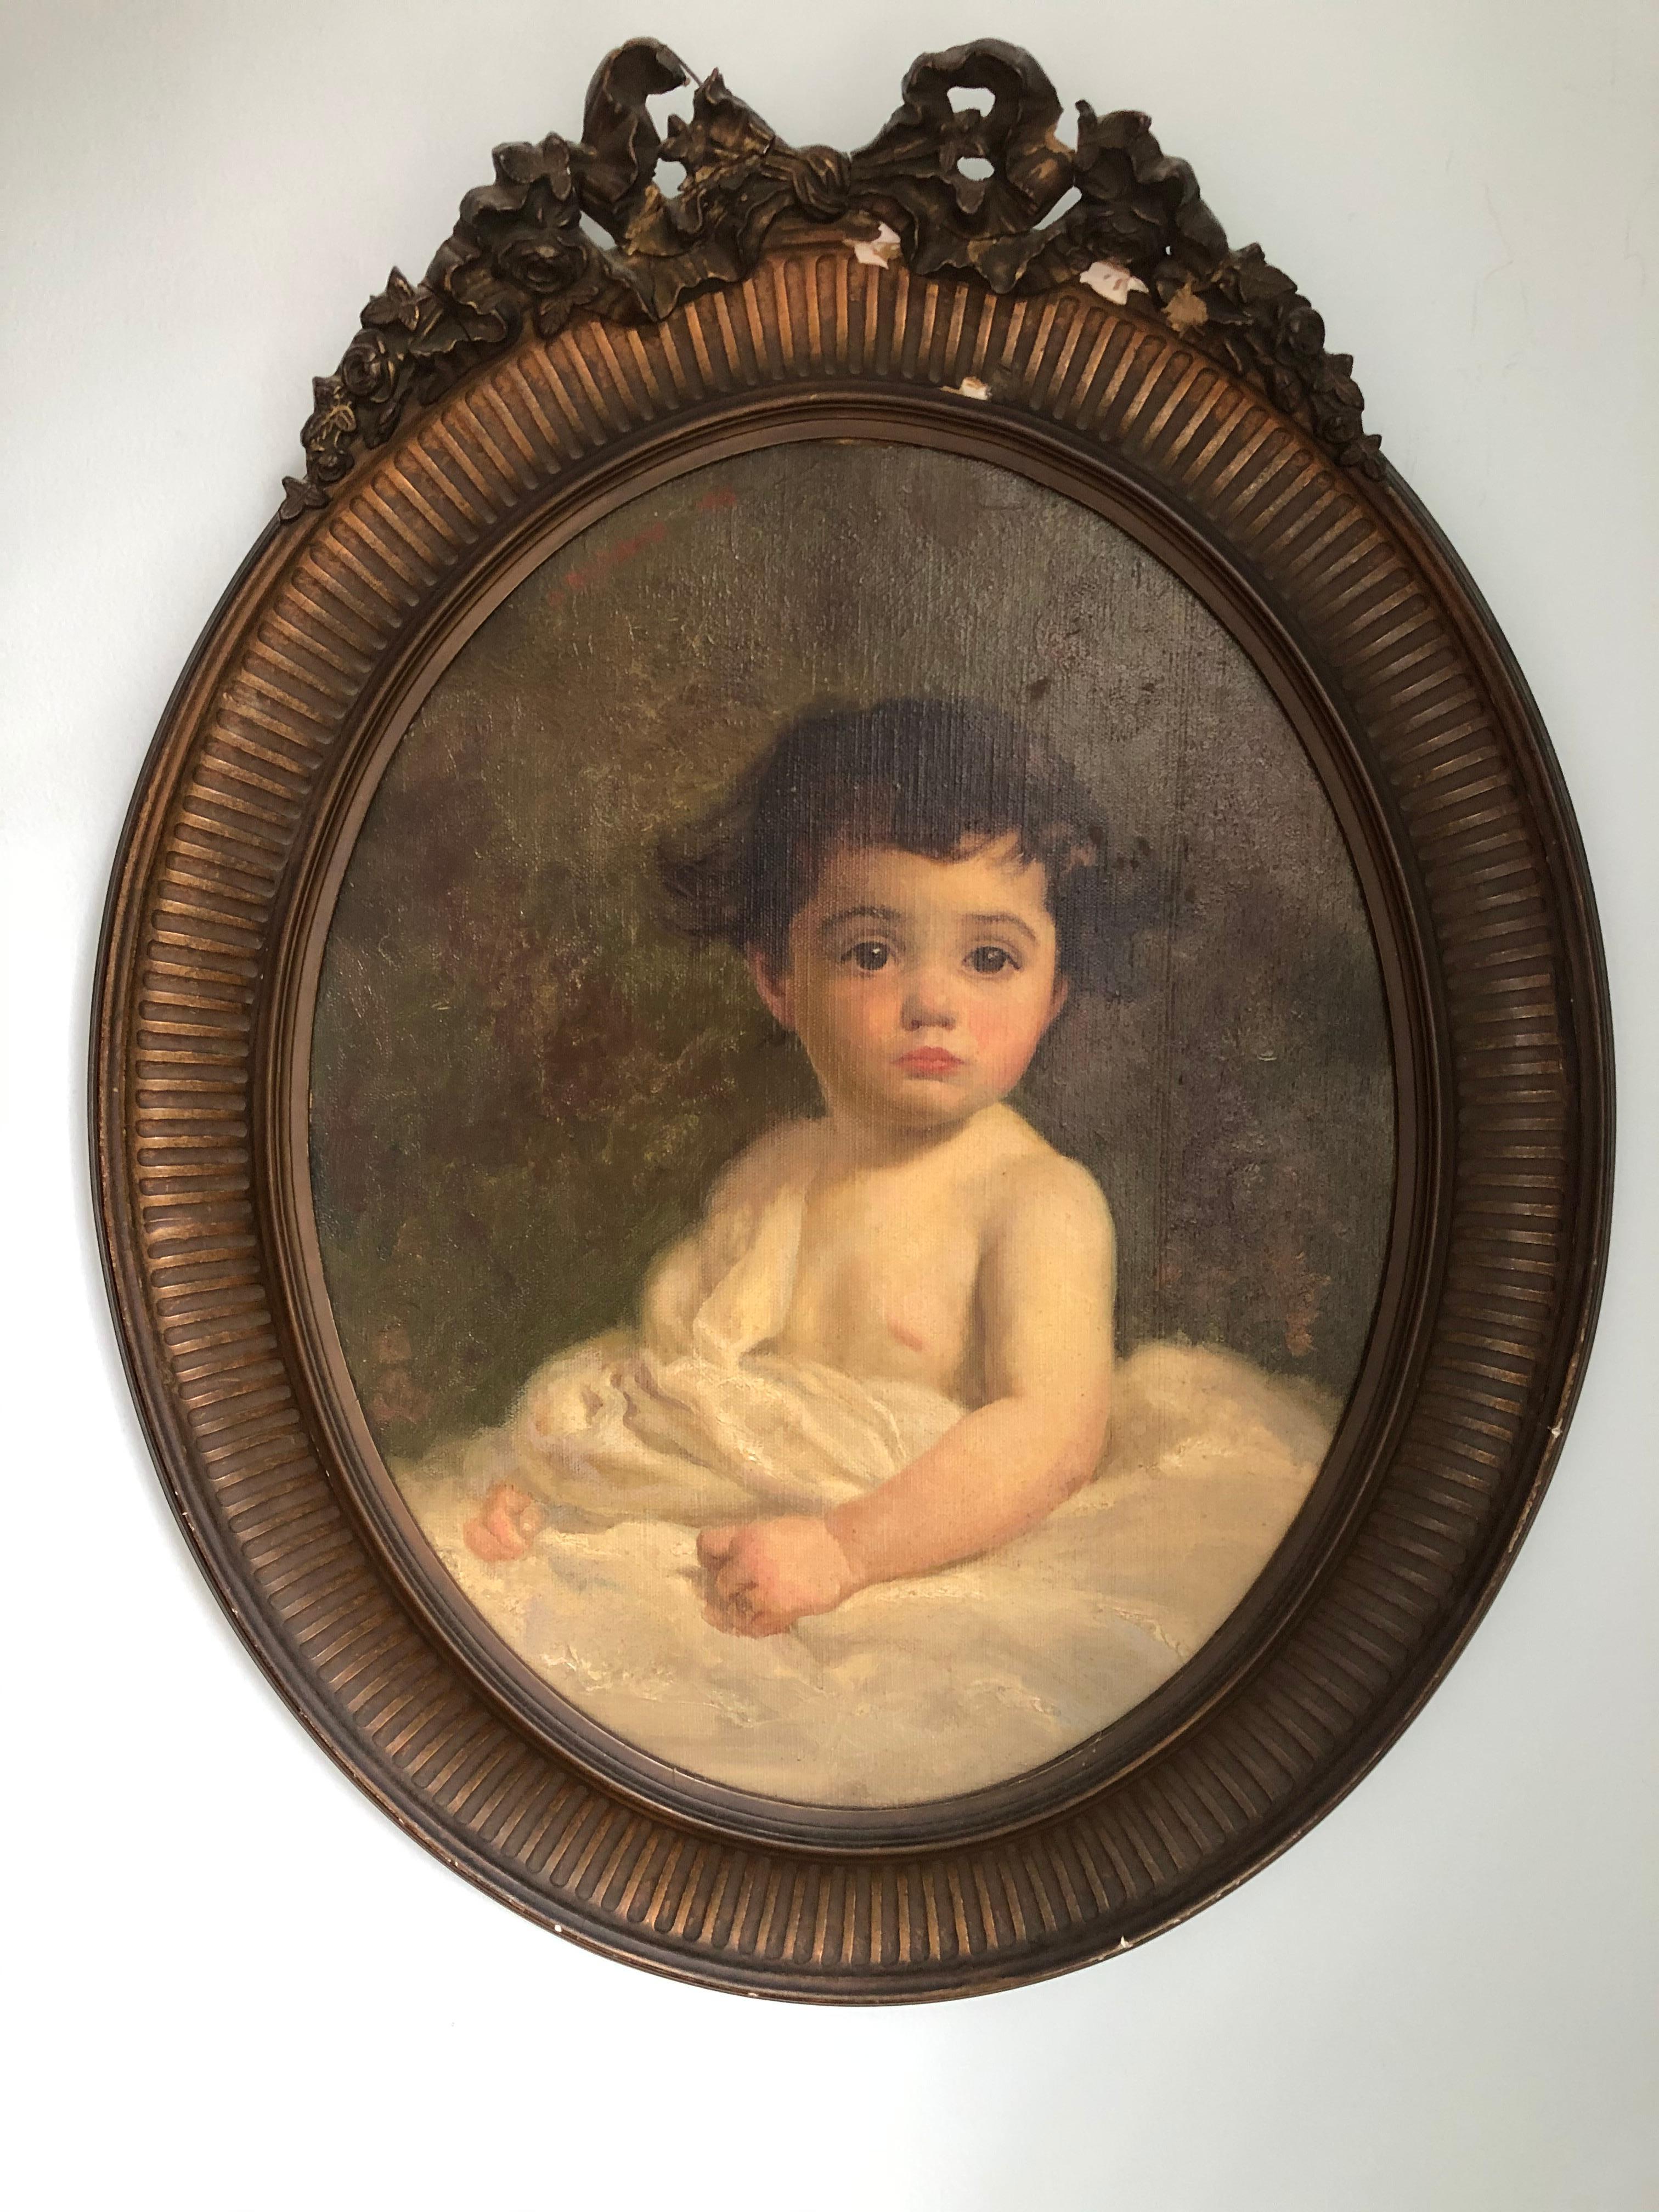 Unknown Portrait Painting - Early 20th Century American Child Portrait